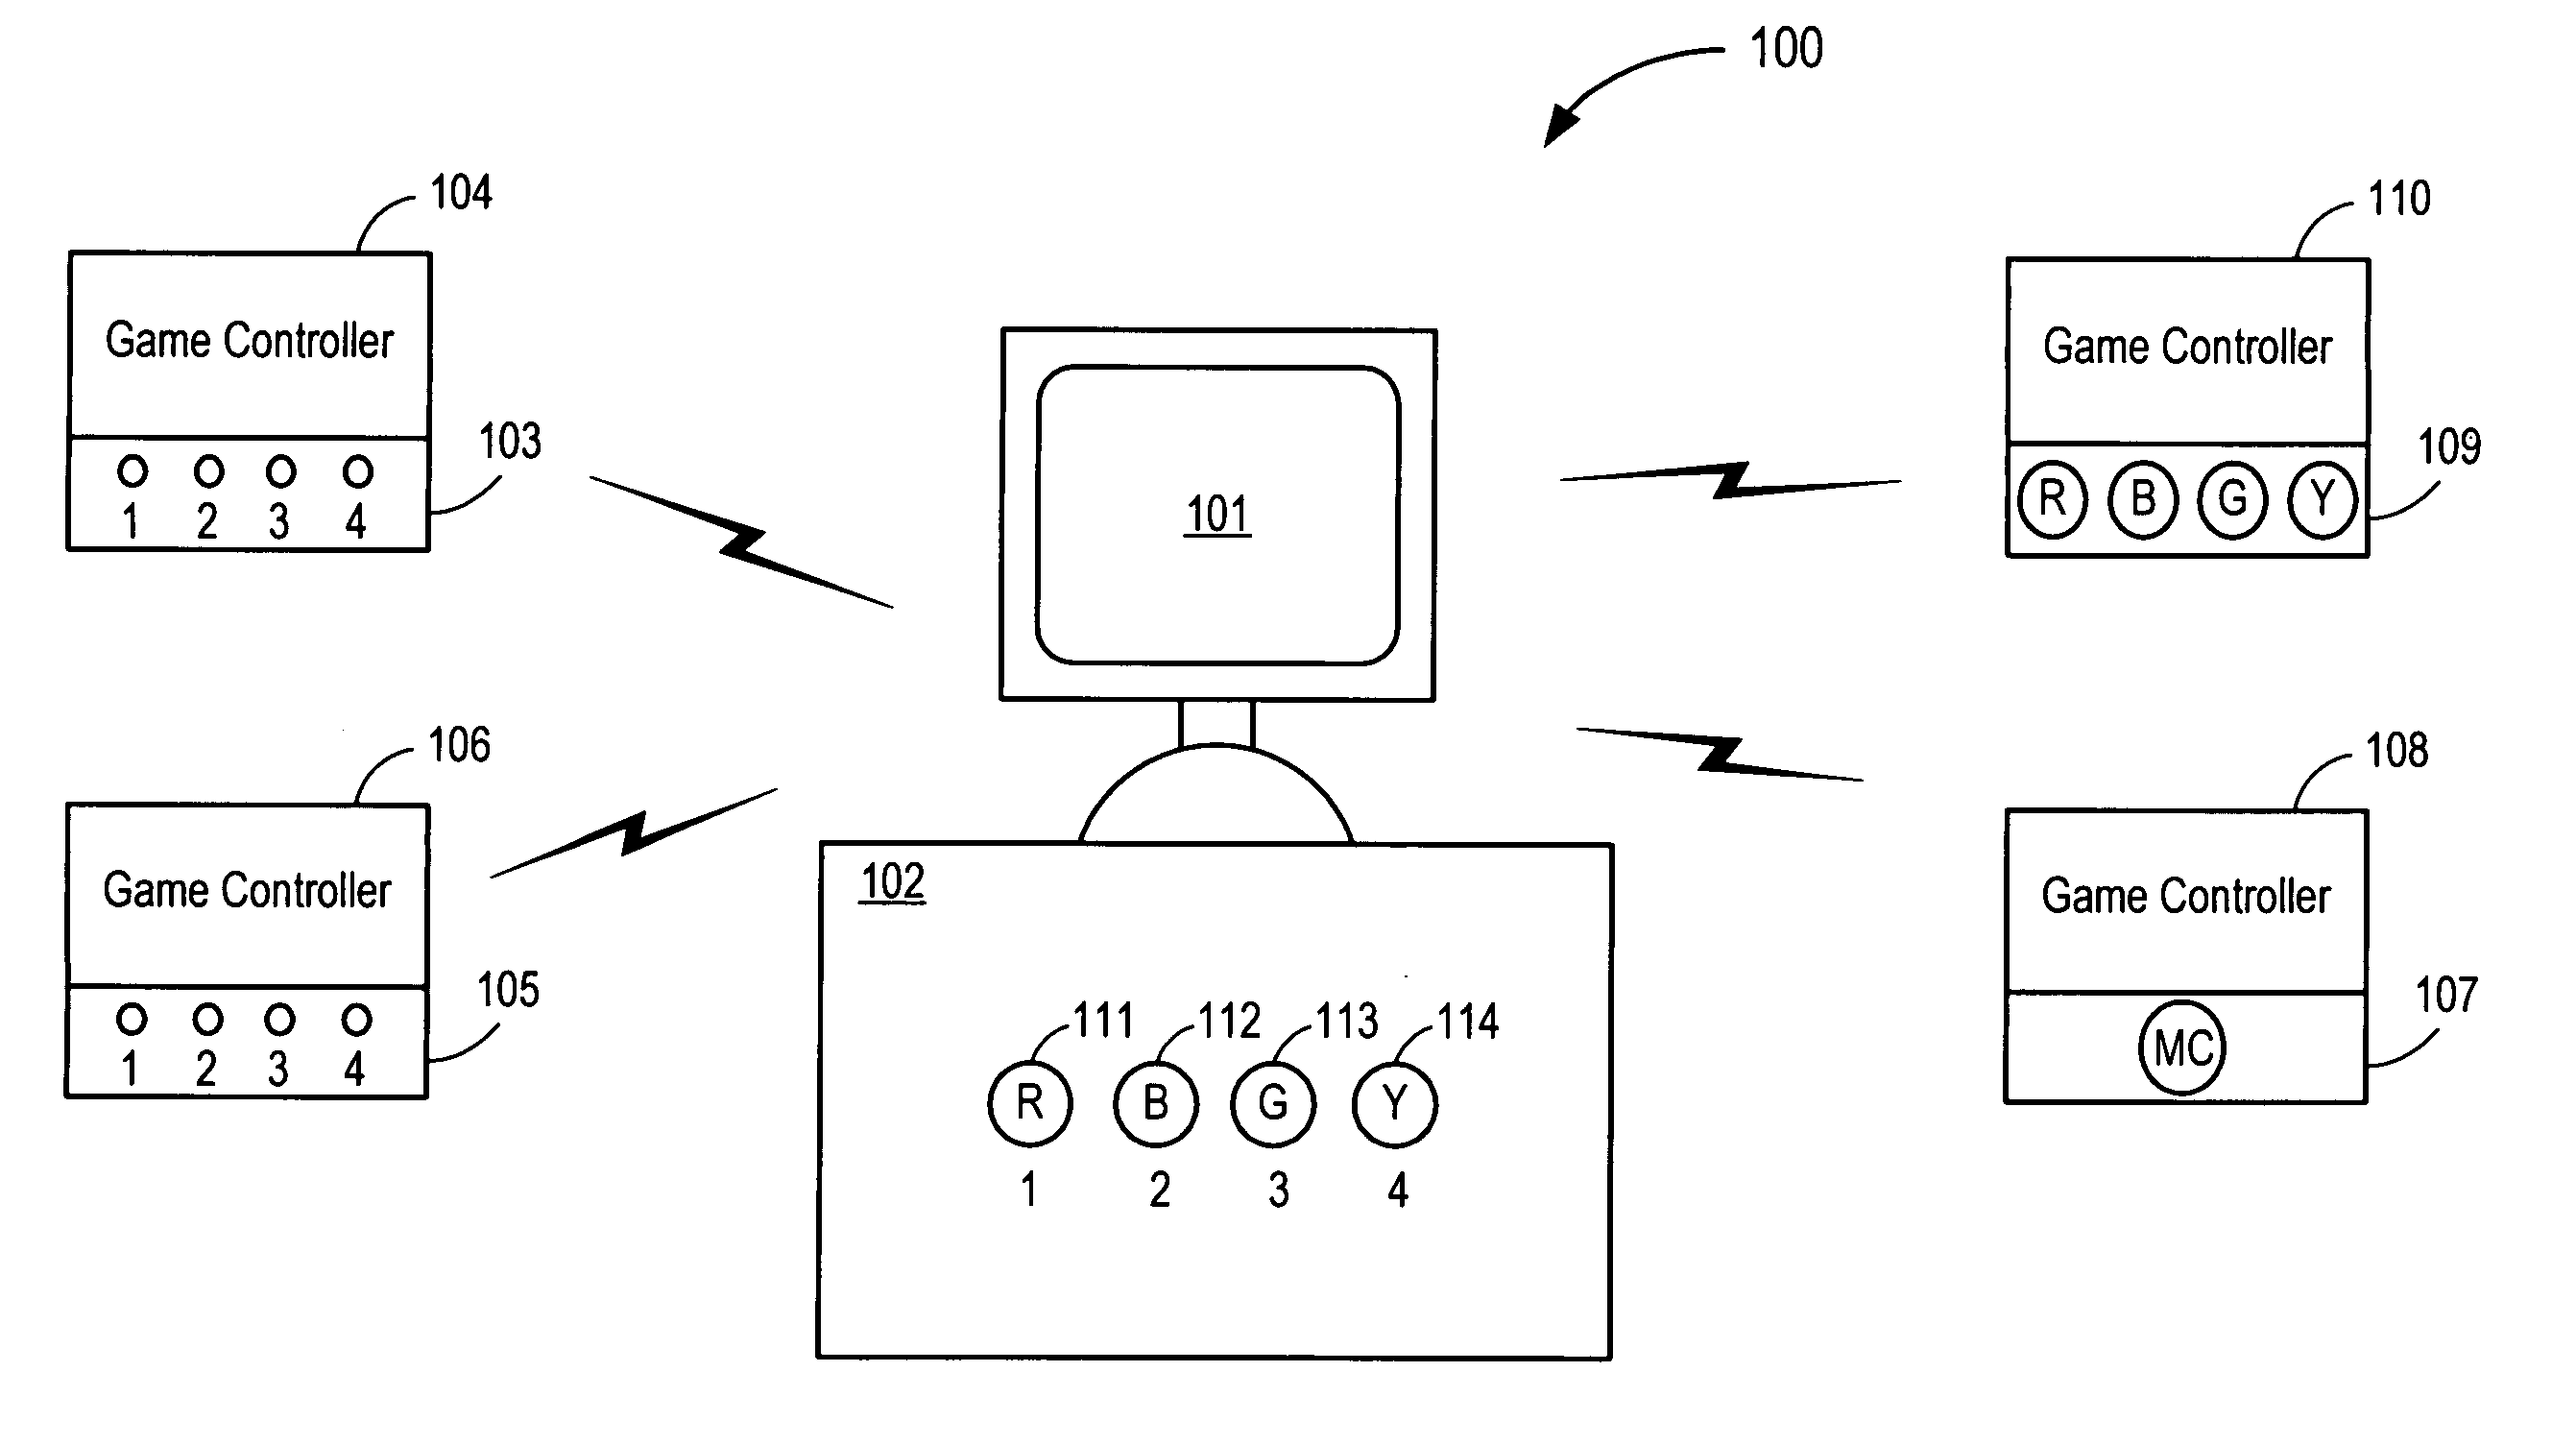 Method of indicating the ordinal number of a player in a wireless gaming system